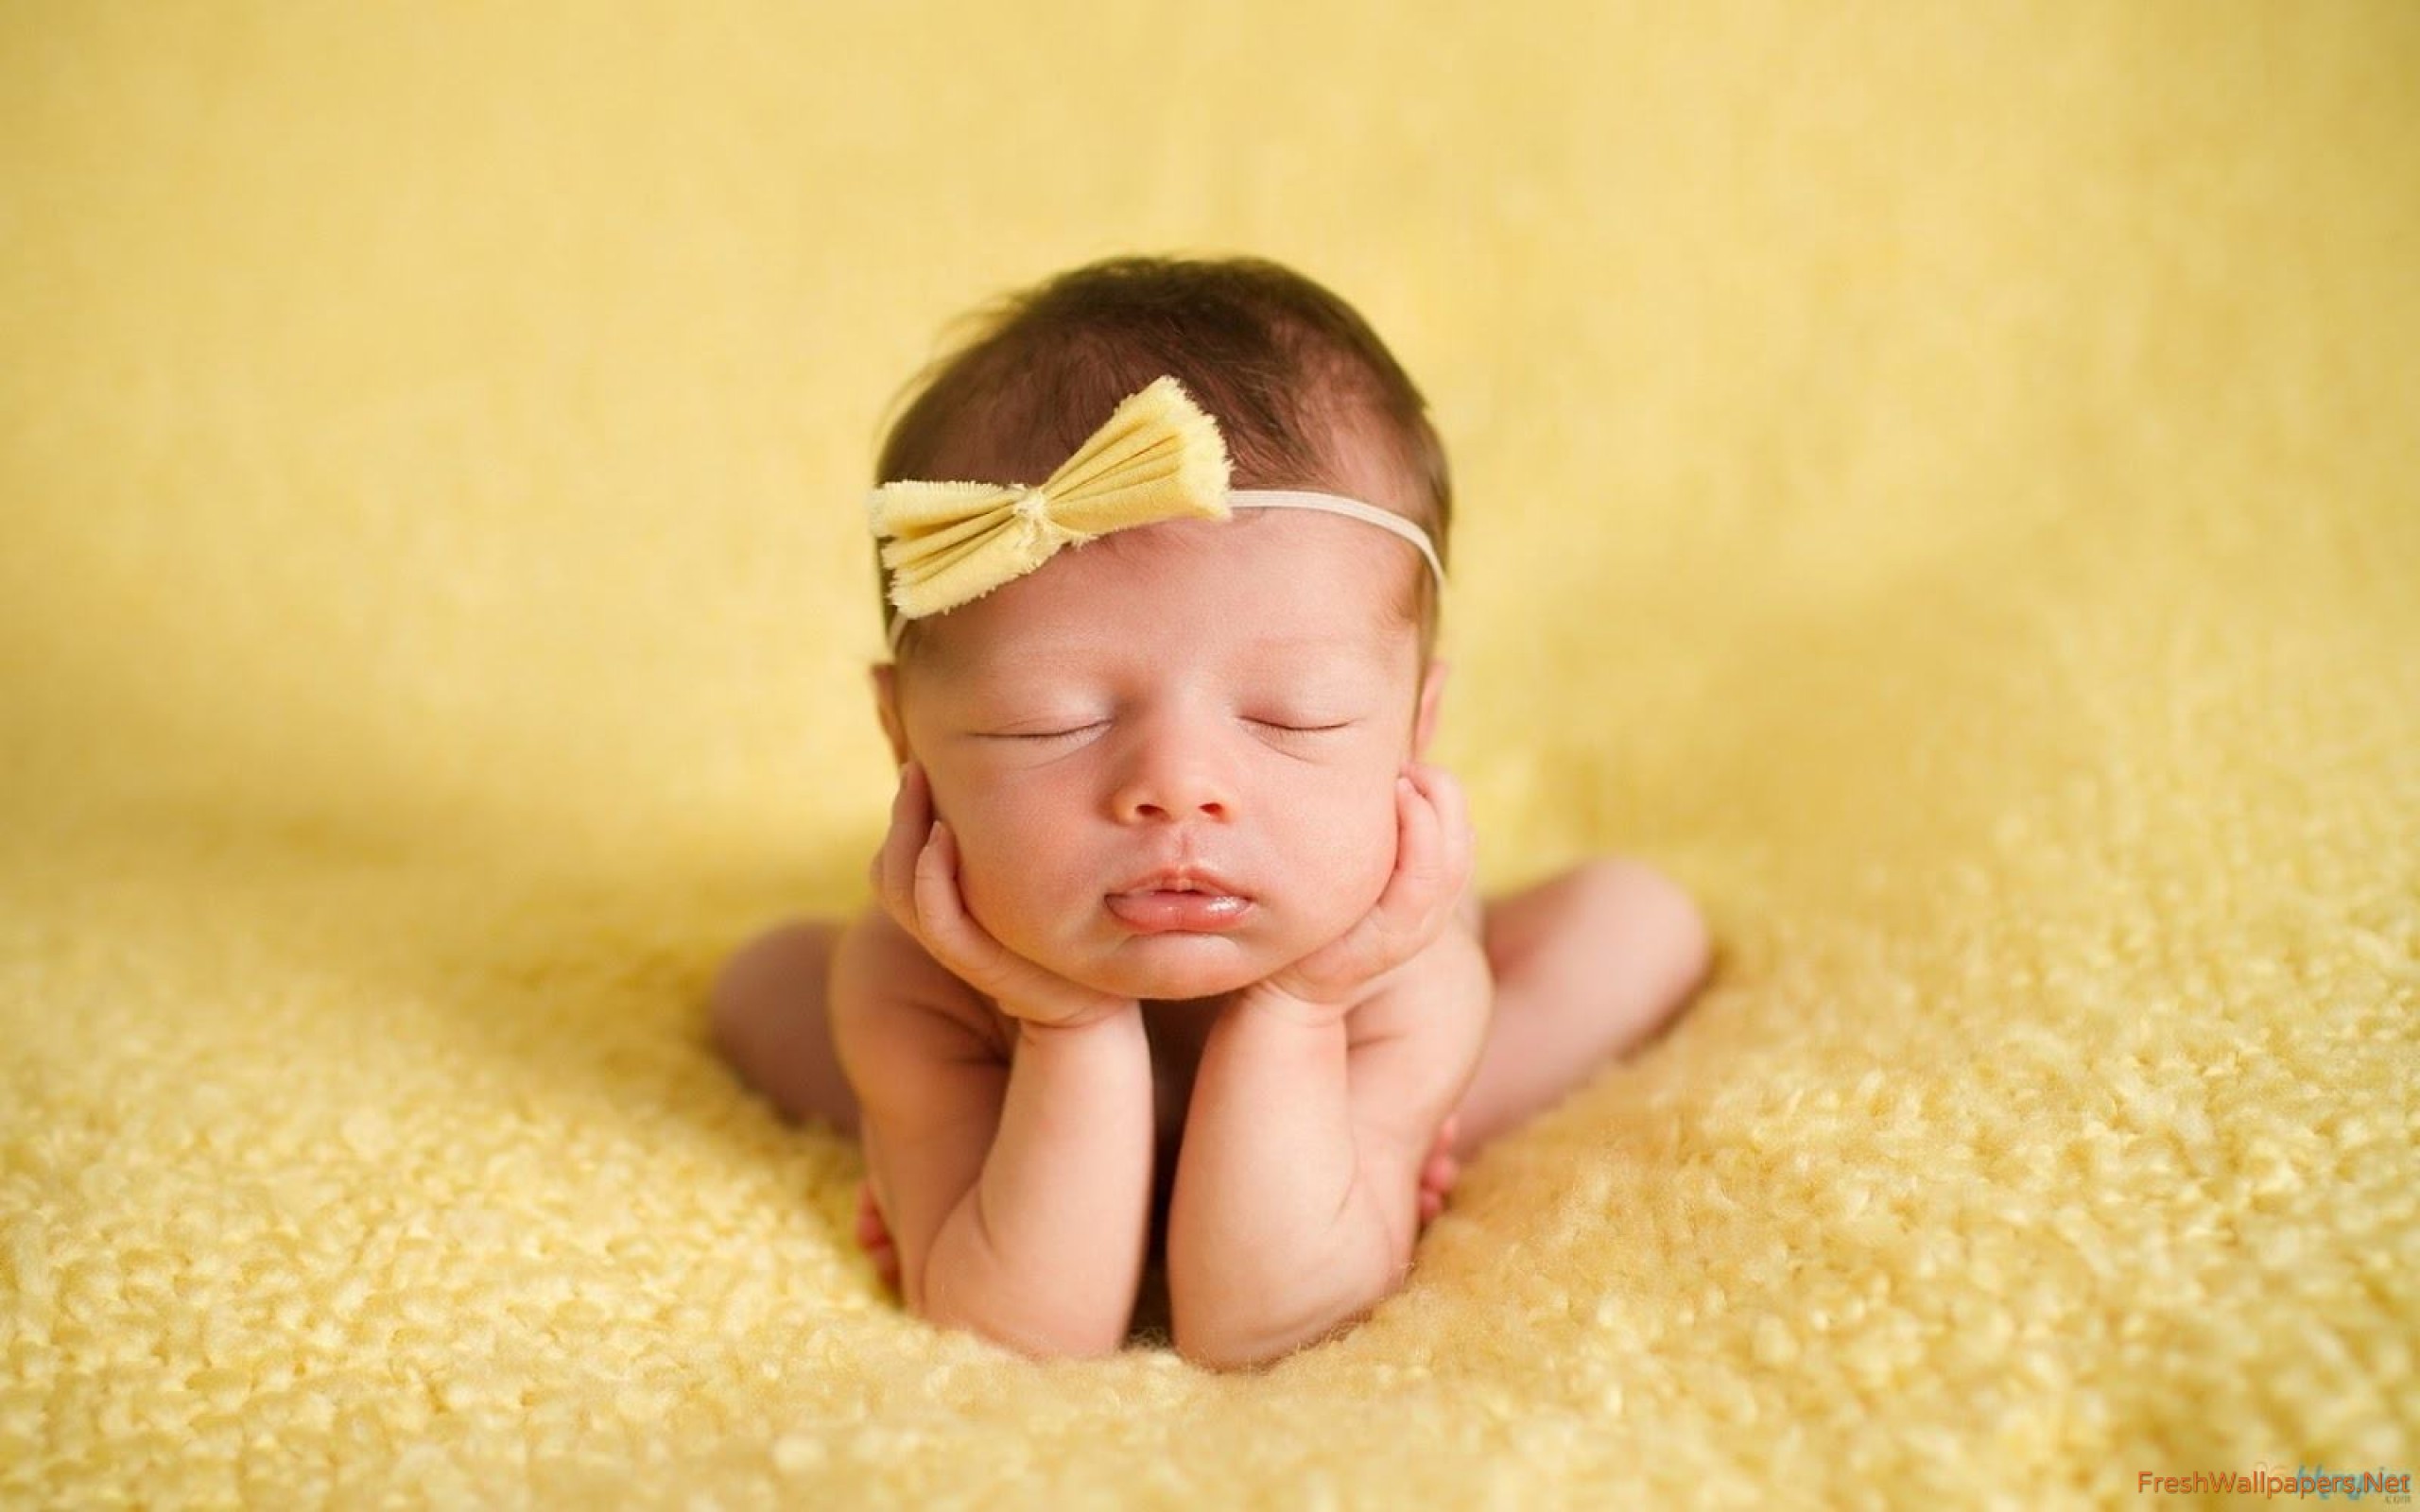 Newborn Baby Images For Laptop - HD Wallpaper 